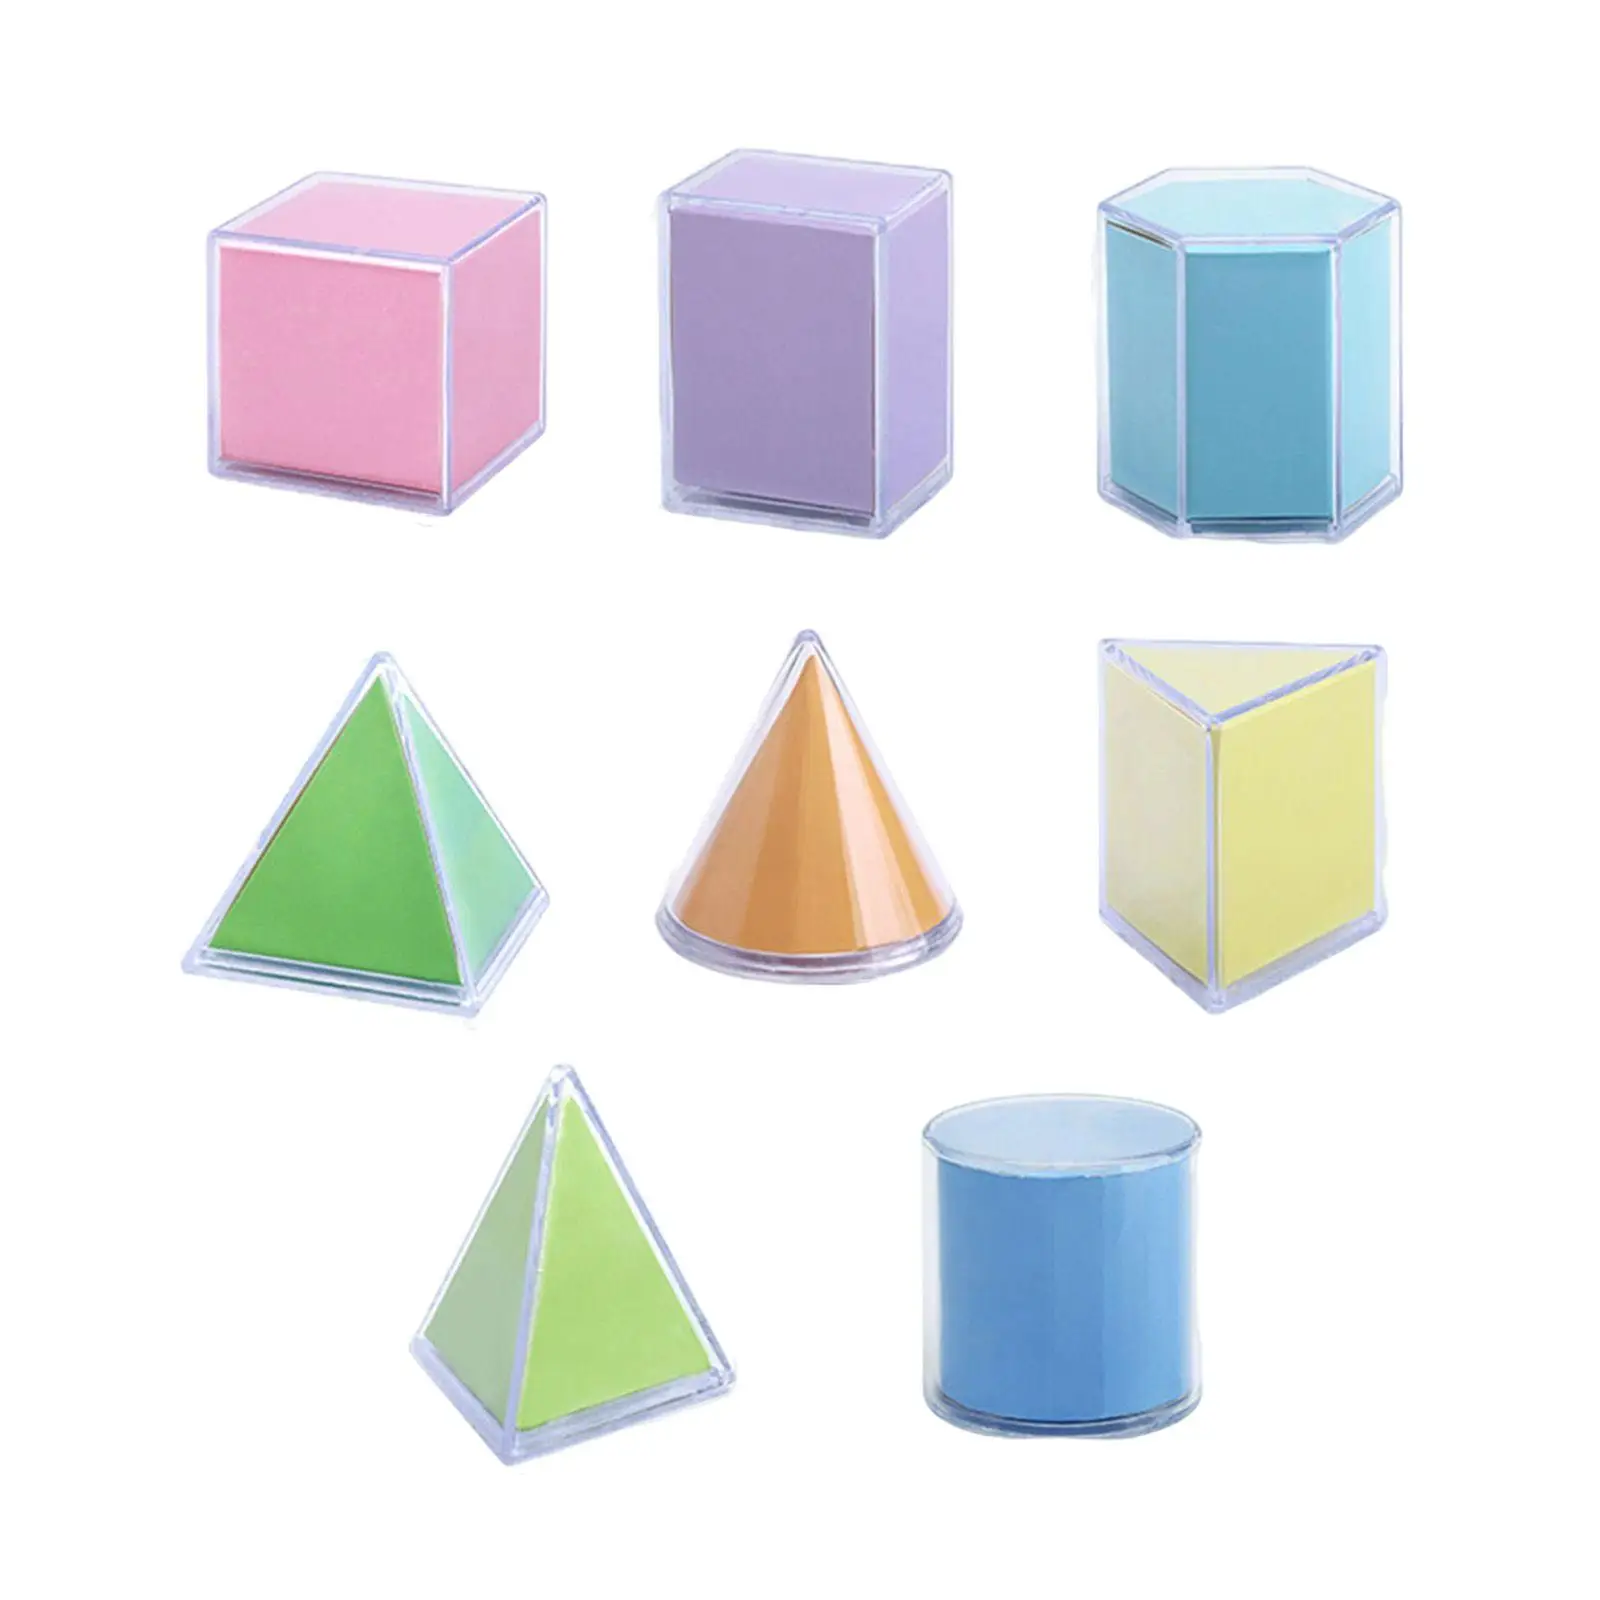 8 Pieces 3D Shapes Geometric Montessori Toys Stacking Game Shape Sorter Sorting Toy for Toddler